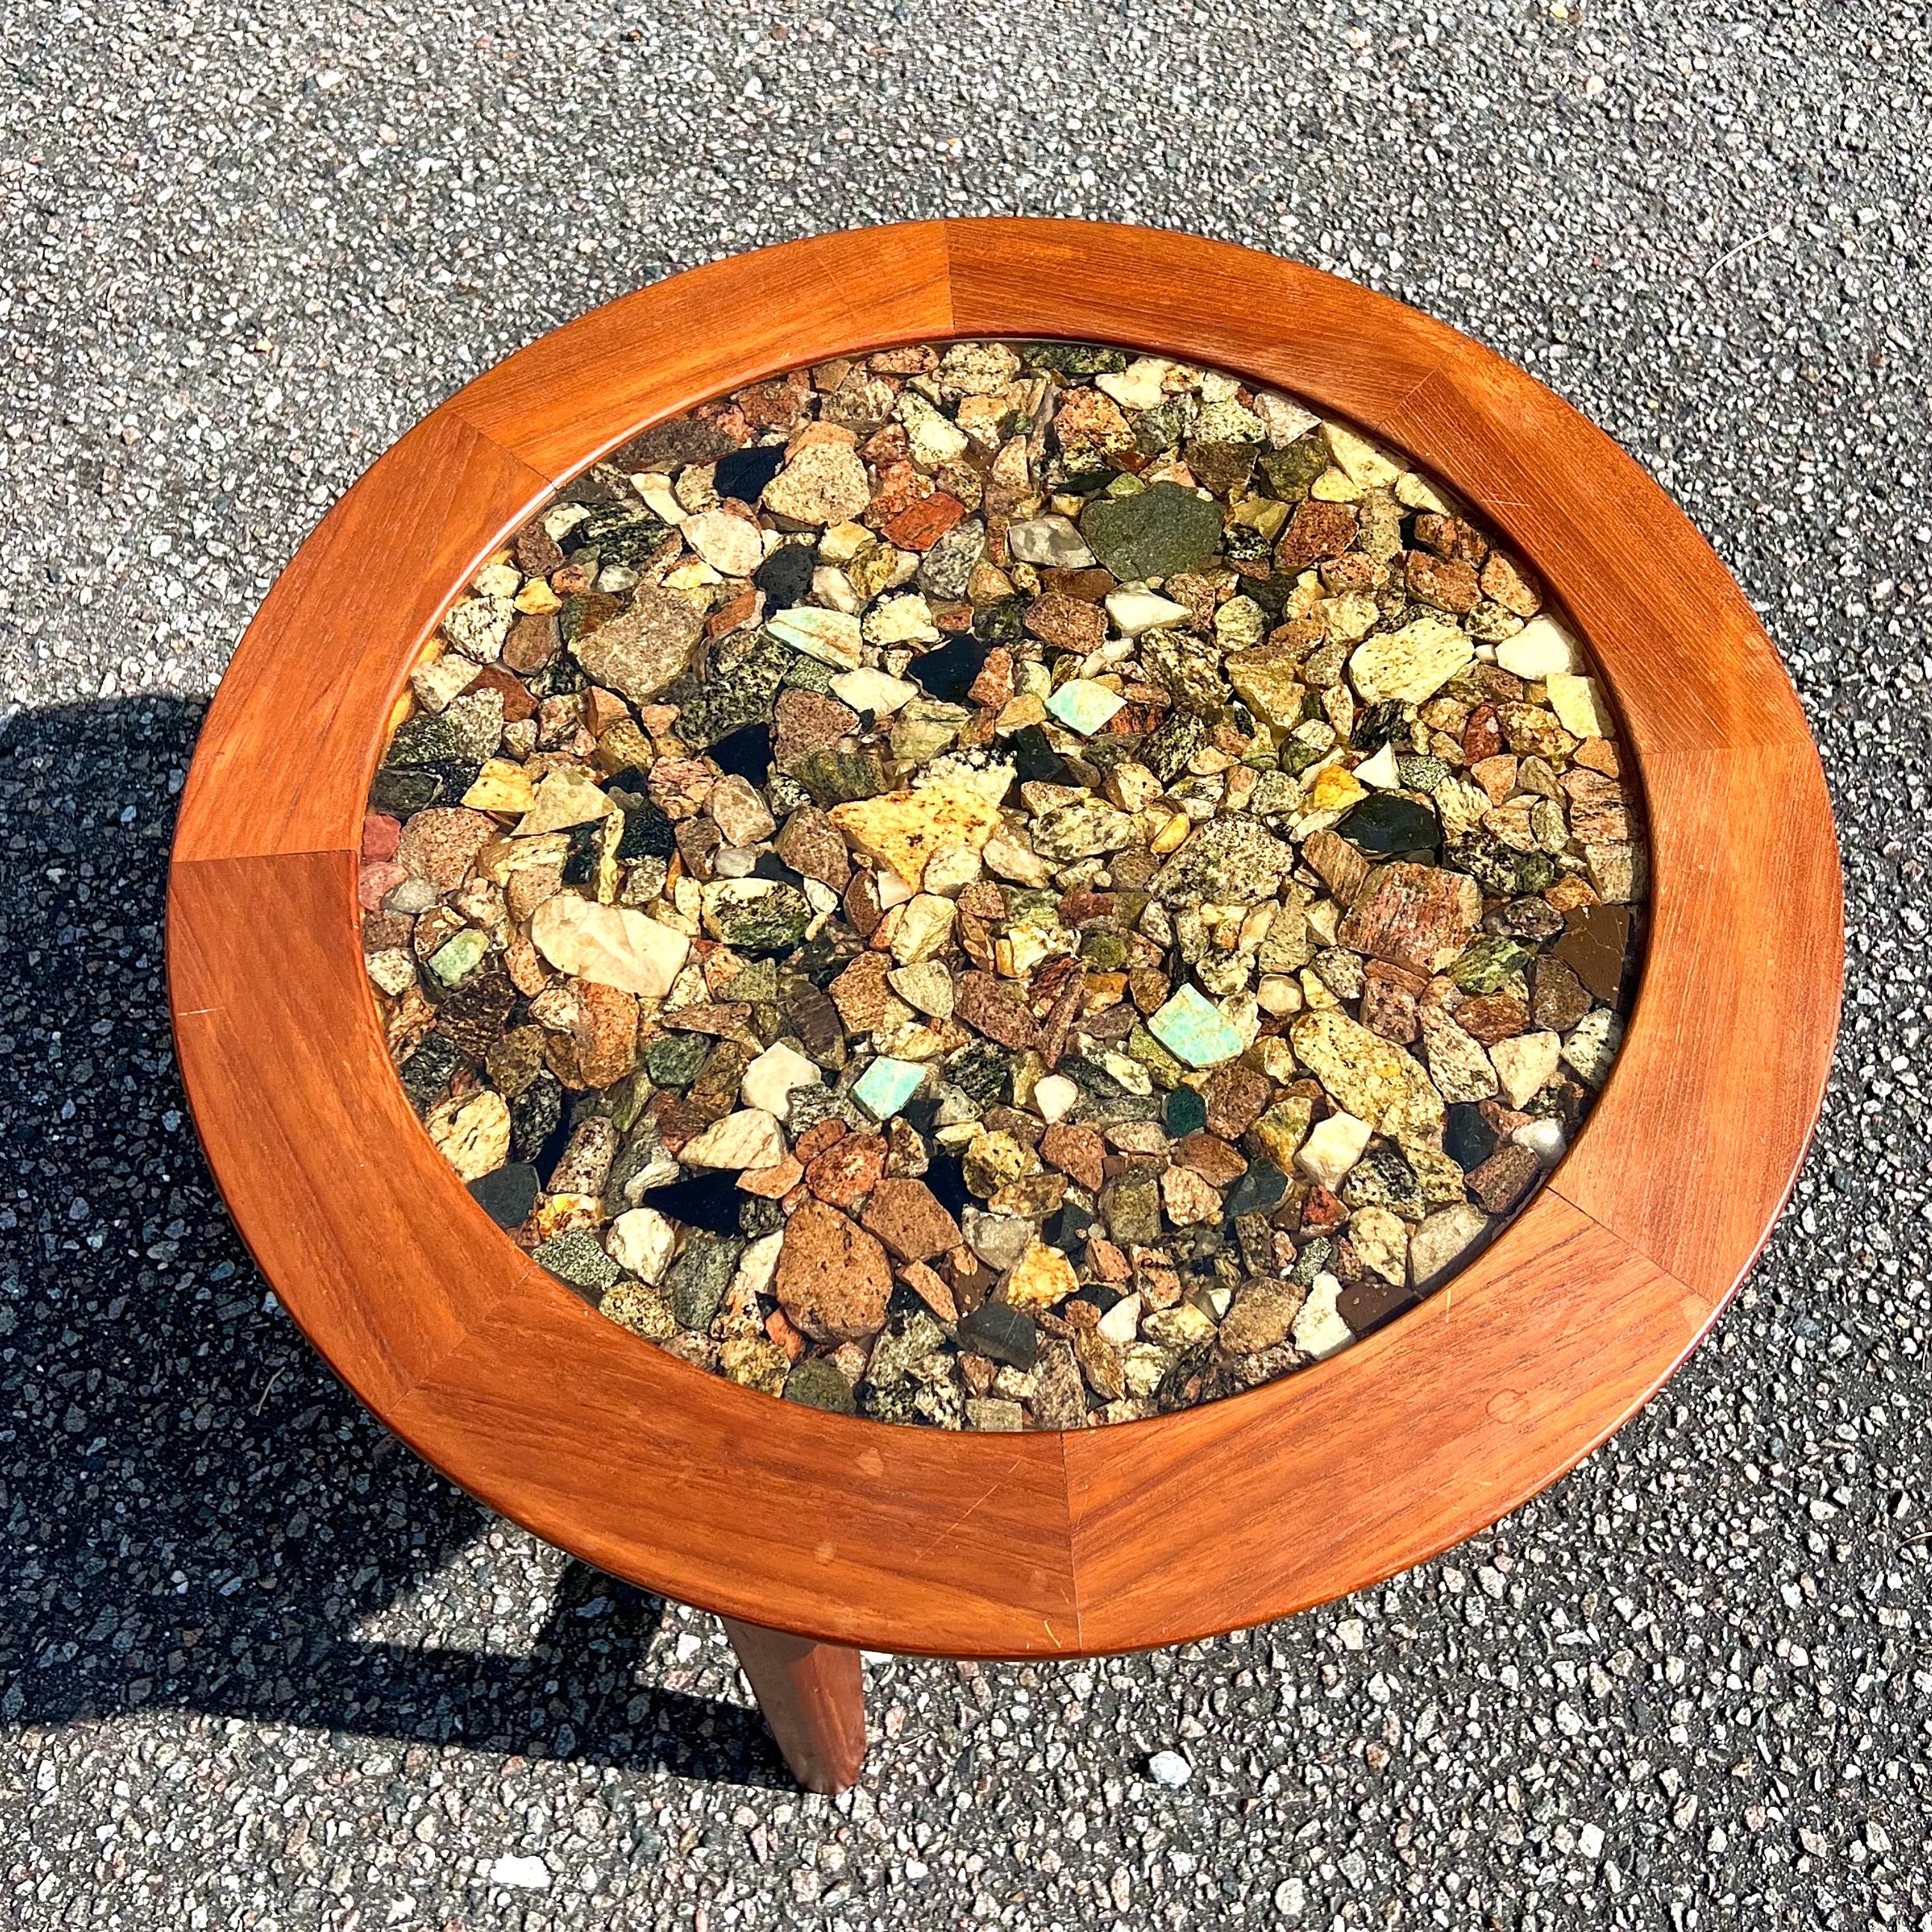 A gorgeous solid teak frame table with an X base stretcher and a beveled teak top.  The stones inside the resin are not polished and when you flip it over, you can see and feel the different specimens.   There is definitely turquoise and obsidian